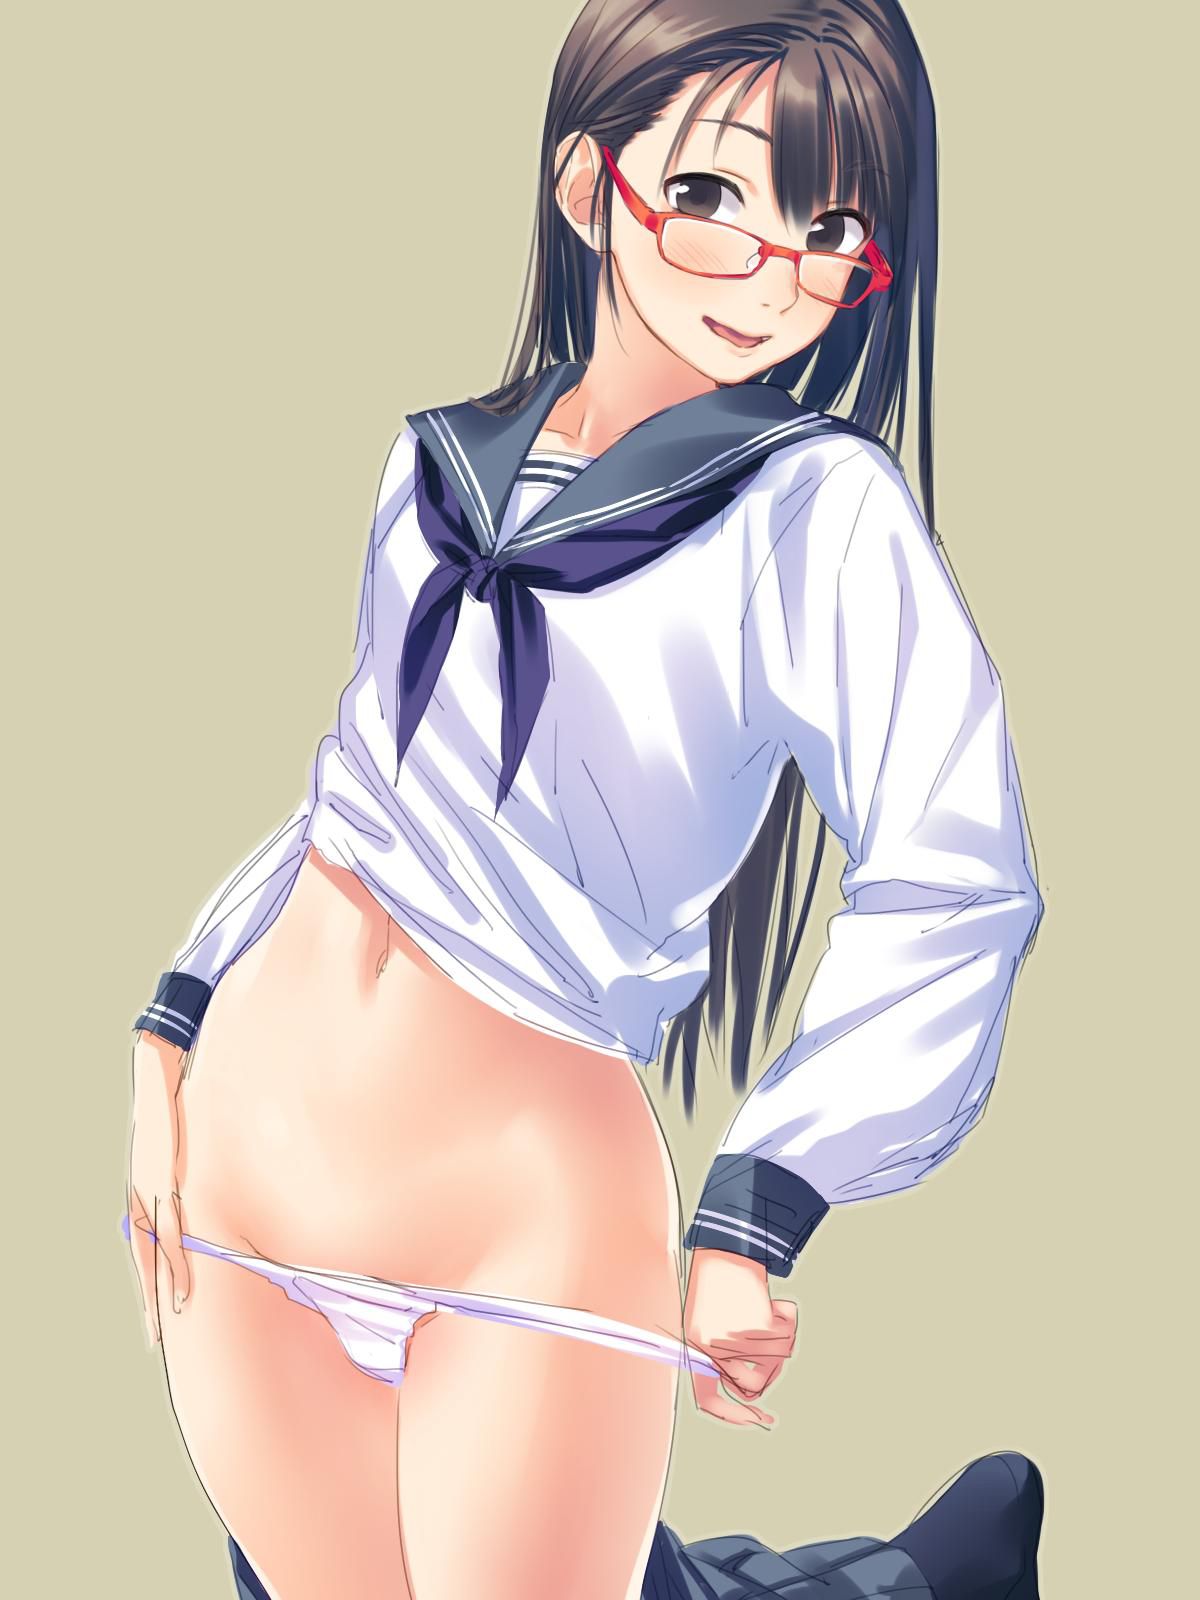 It is underwear second image スレ [about to wear it] during the putting on and taking off 11 [about to take it off] 30